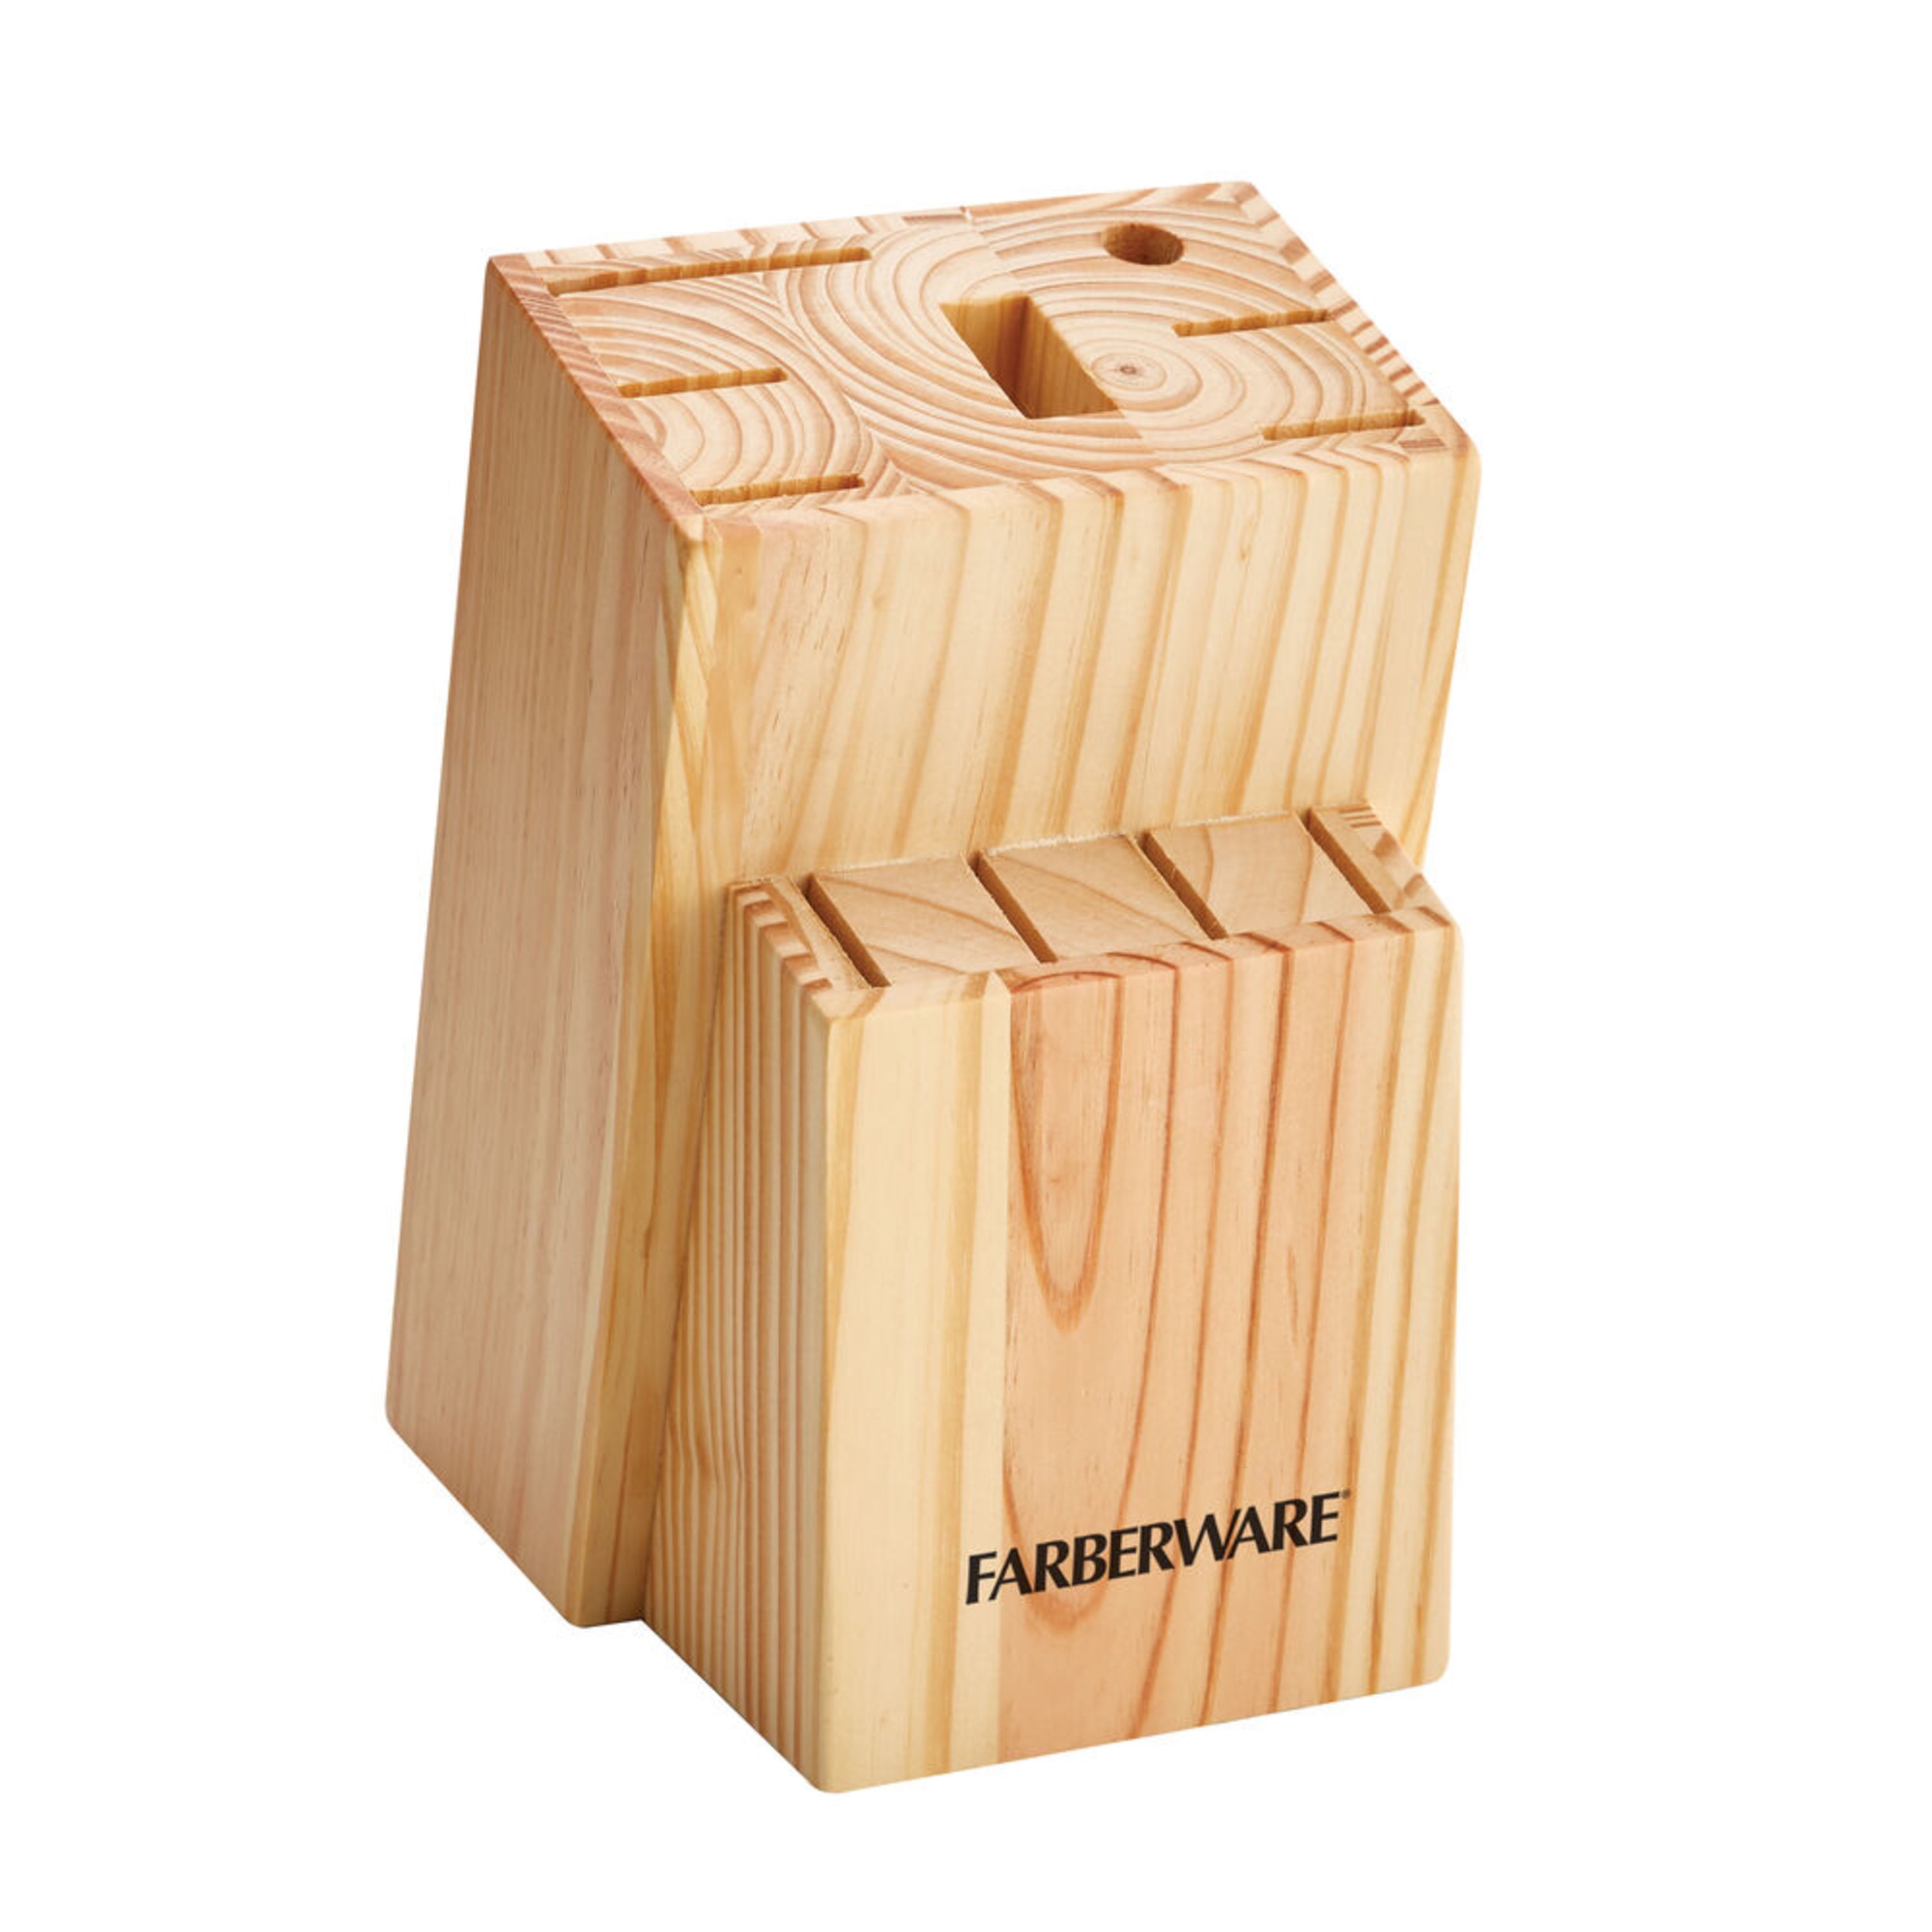 Farberware Knives Farmers Market 12 Piece Prep Set, Knives and Cutting  Boards